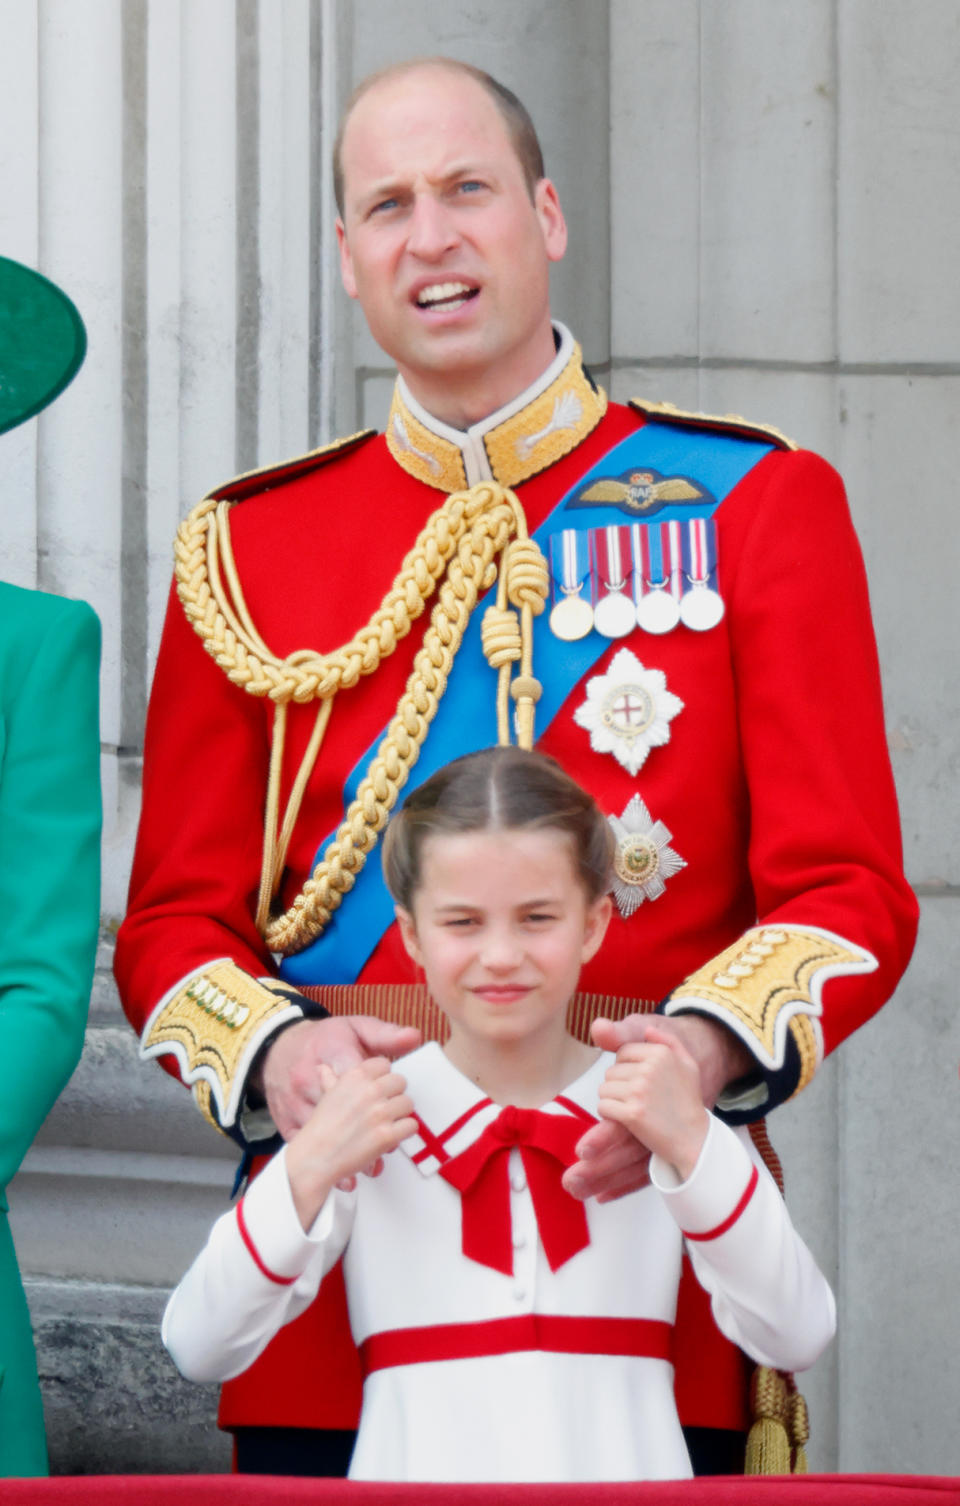 Prince William and Princess Charlotte at King's Trooping the Colour on Buckingham Palace balcony